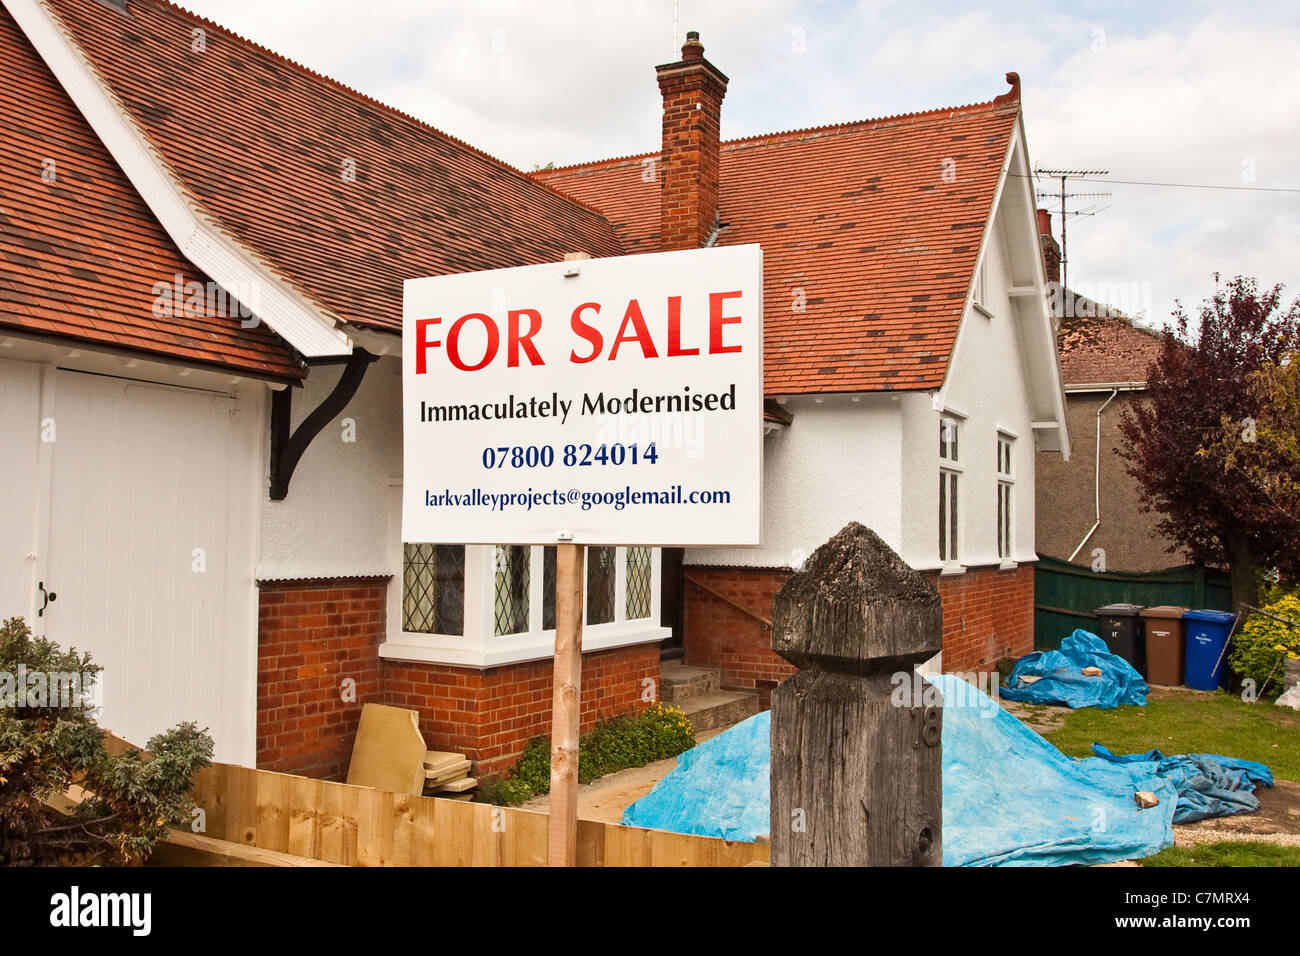 Modernised bungalow for sale in Bury St Edmunds, UK Stock Photo